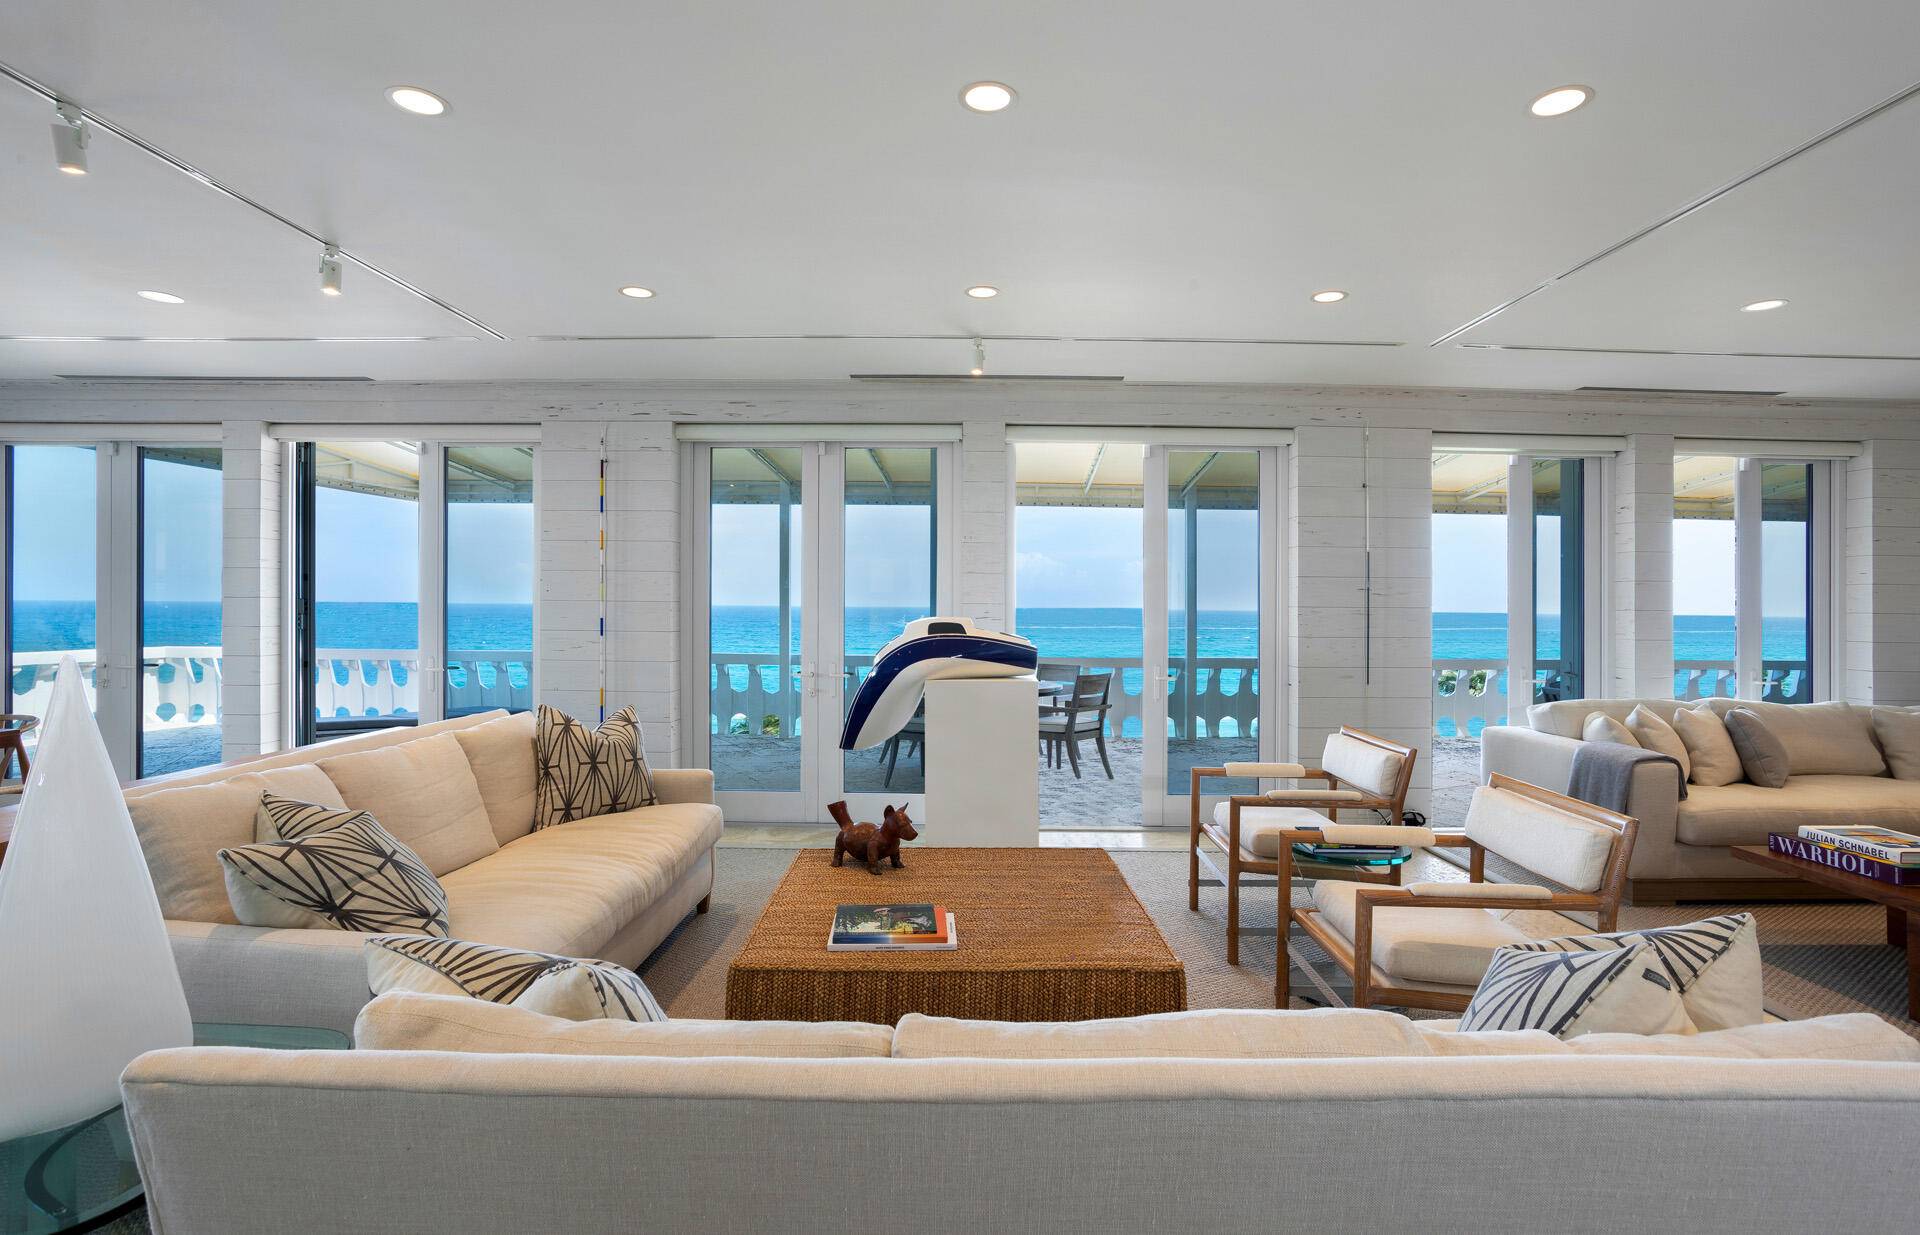 Stunning Penthouse apartment in the coolest mid century building in Palm Beach.